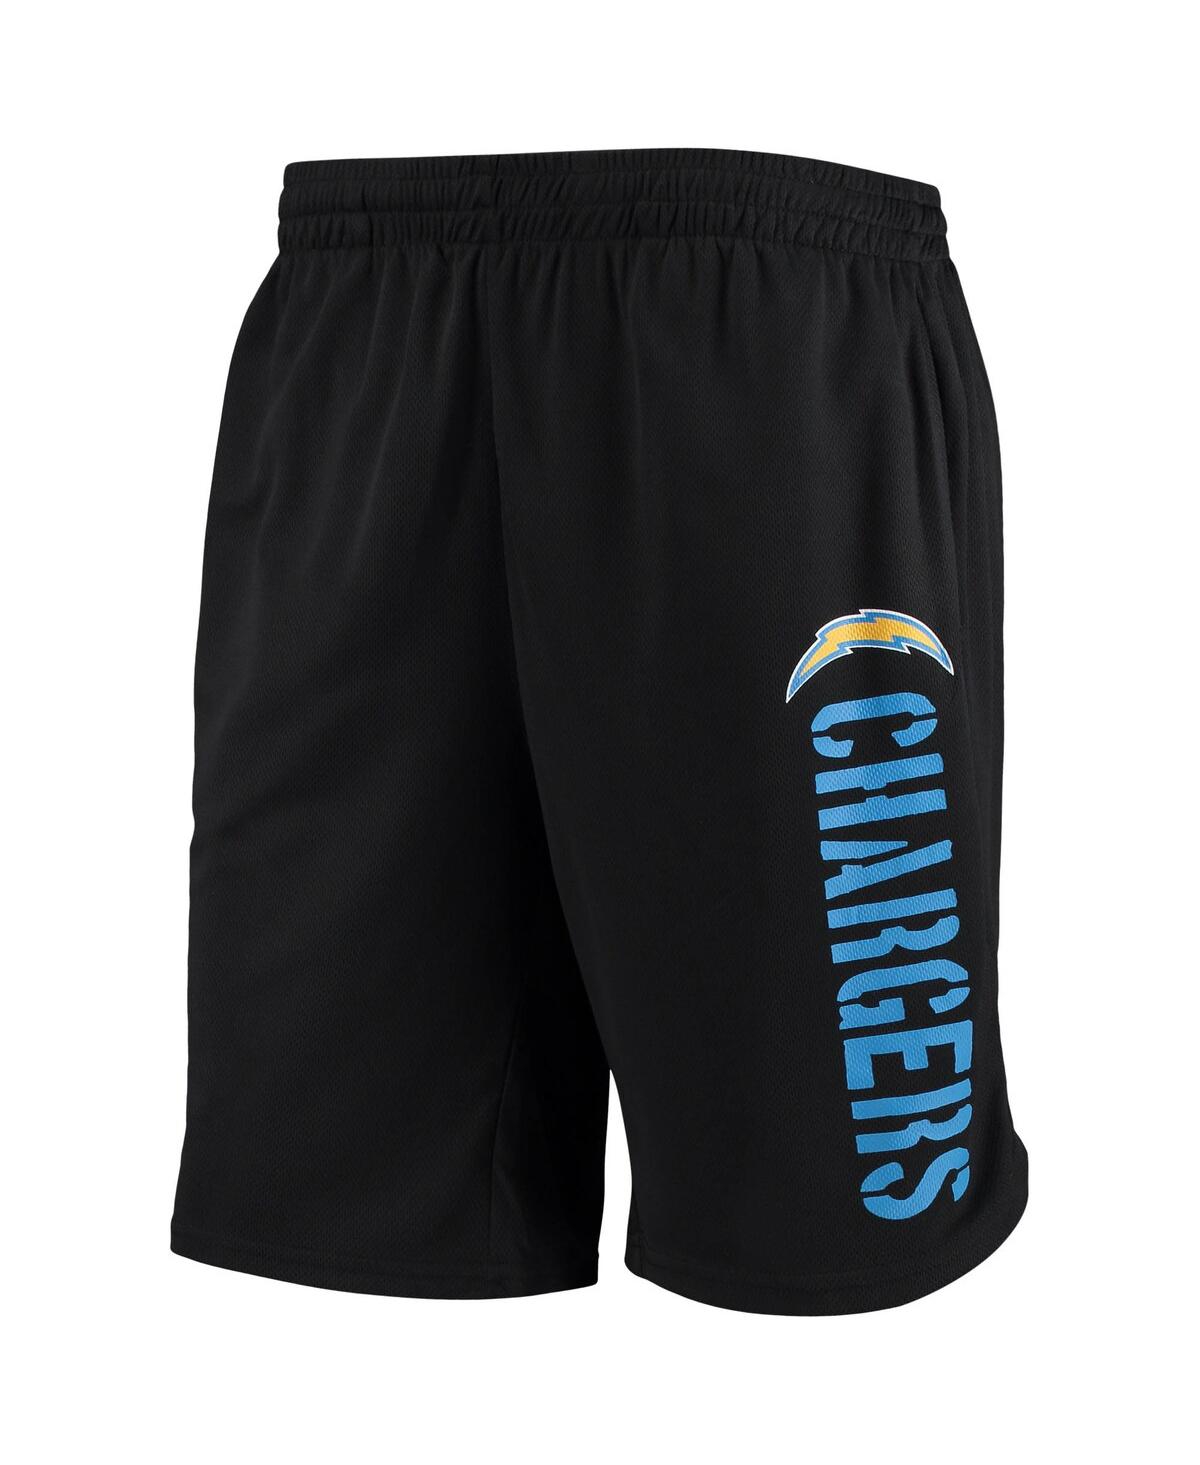 Shop Msx By Michael Strahan Men's  Black Los Angeles Chargers Training Shorts